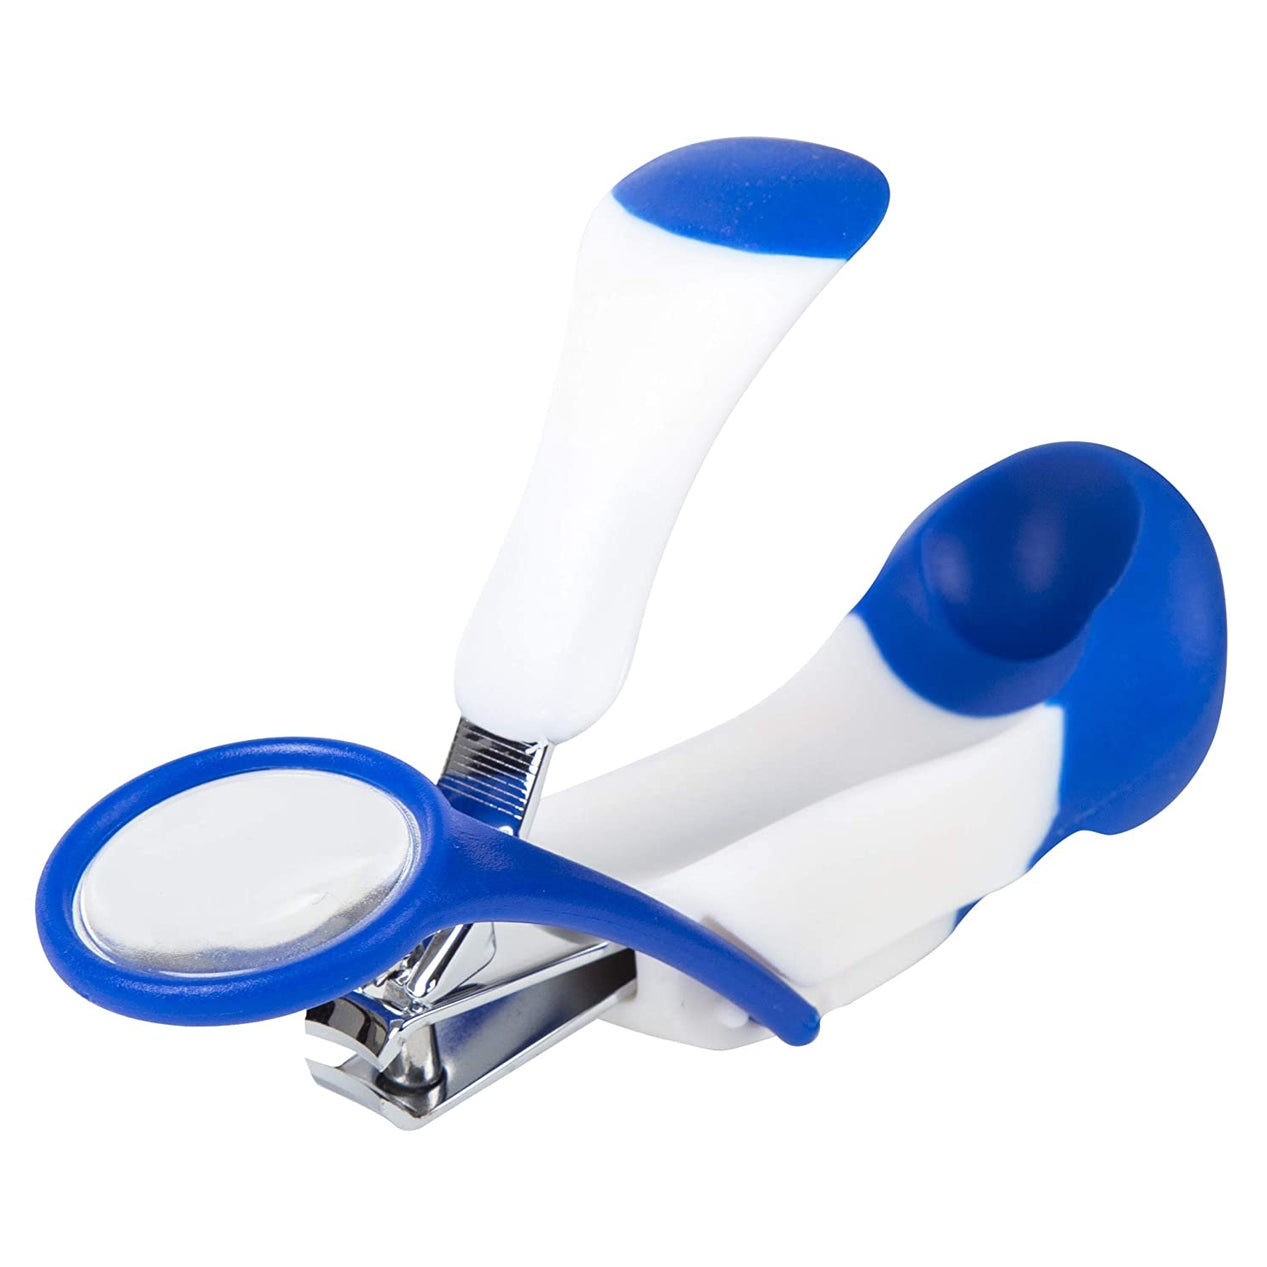 HOPOP Baby Nail Clipper With Magnifier - Blue 0m+